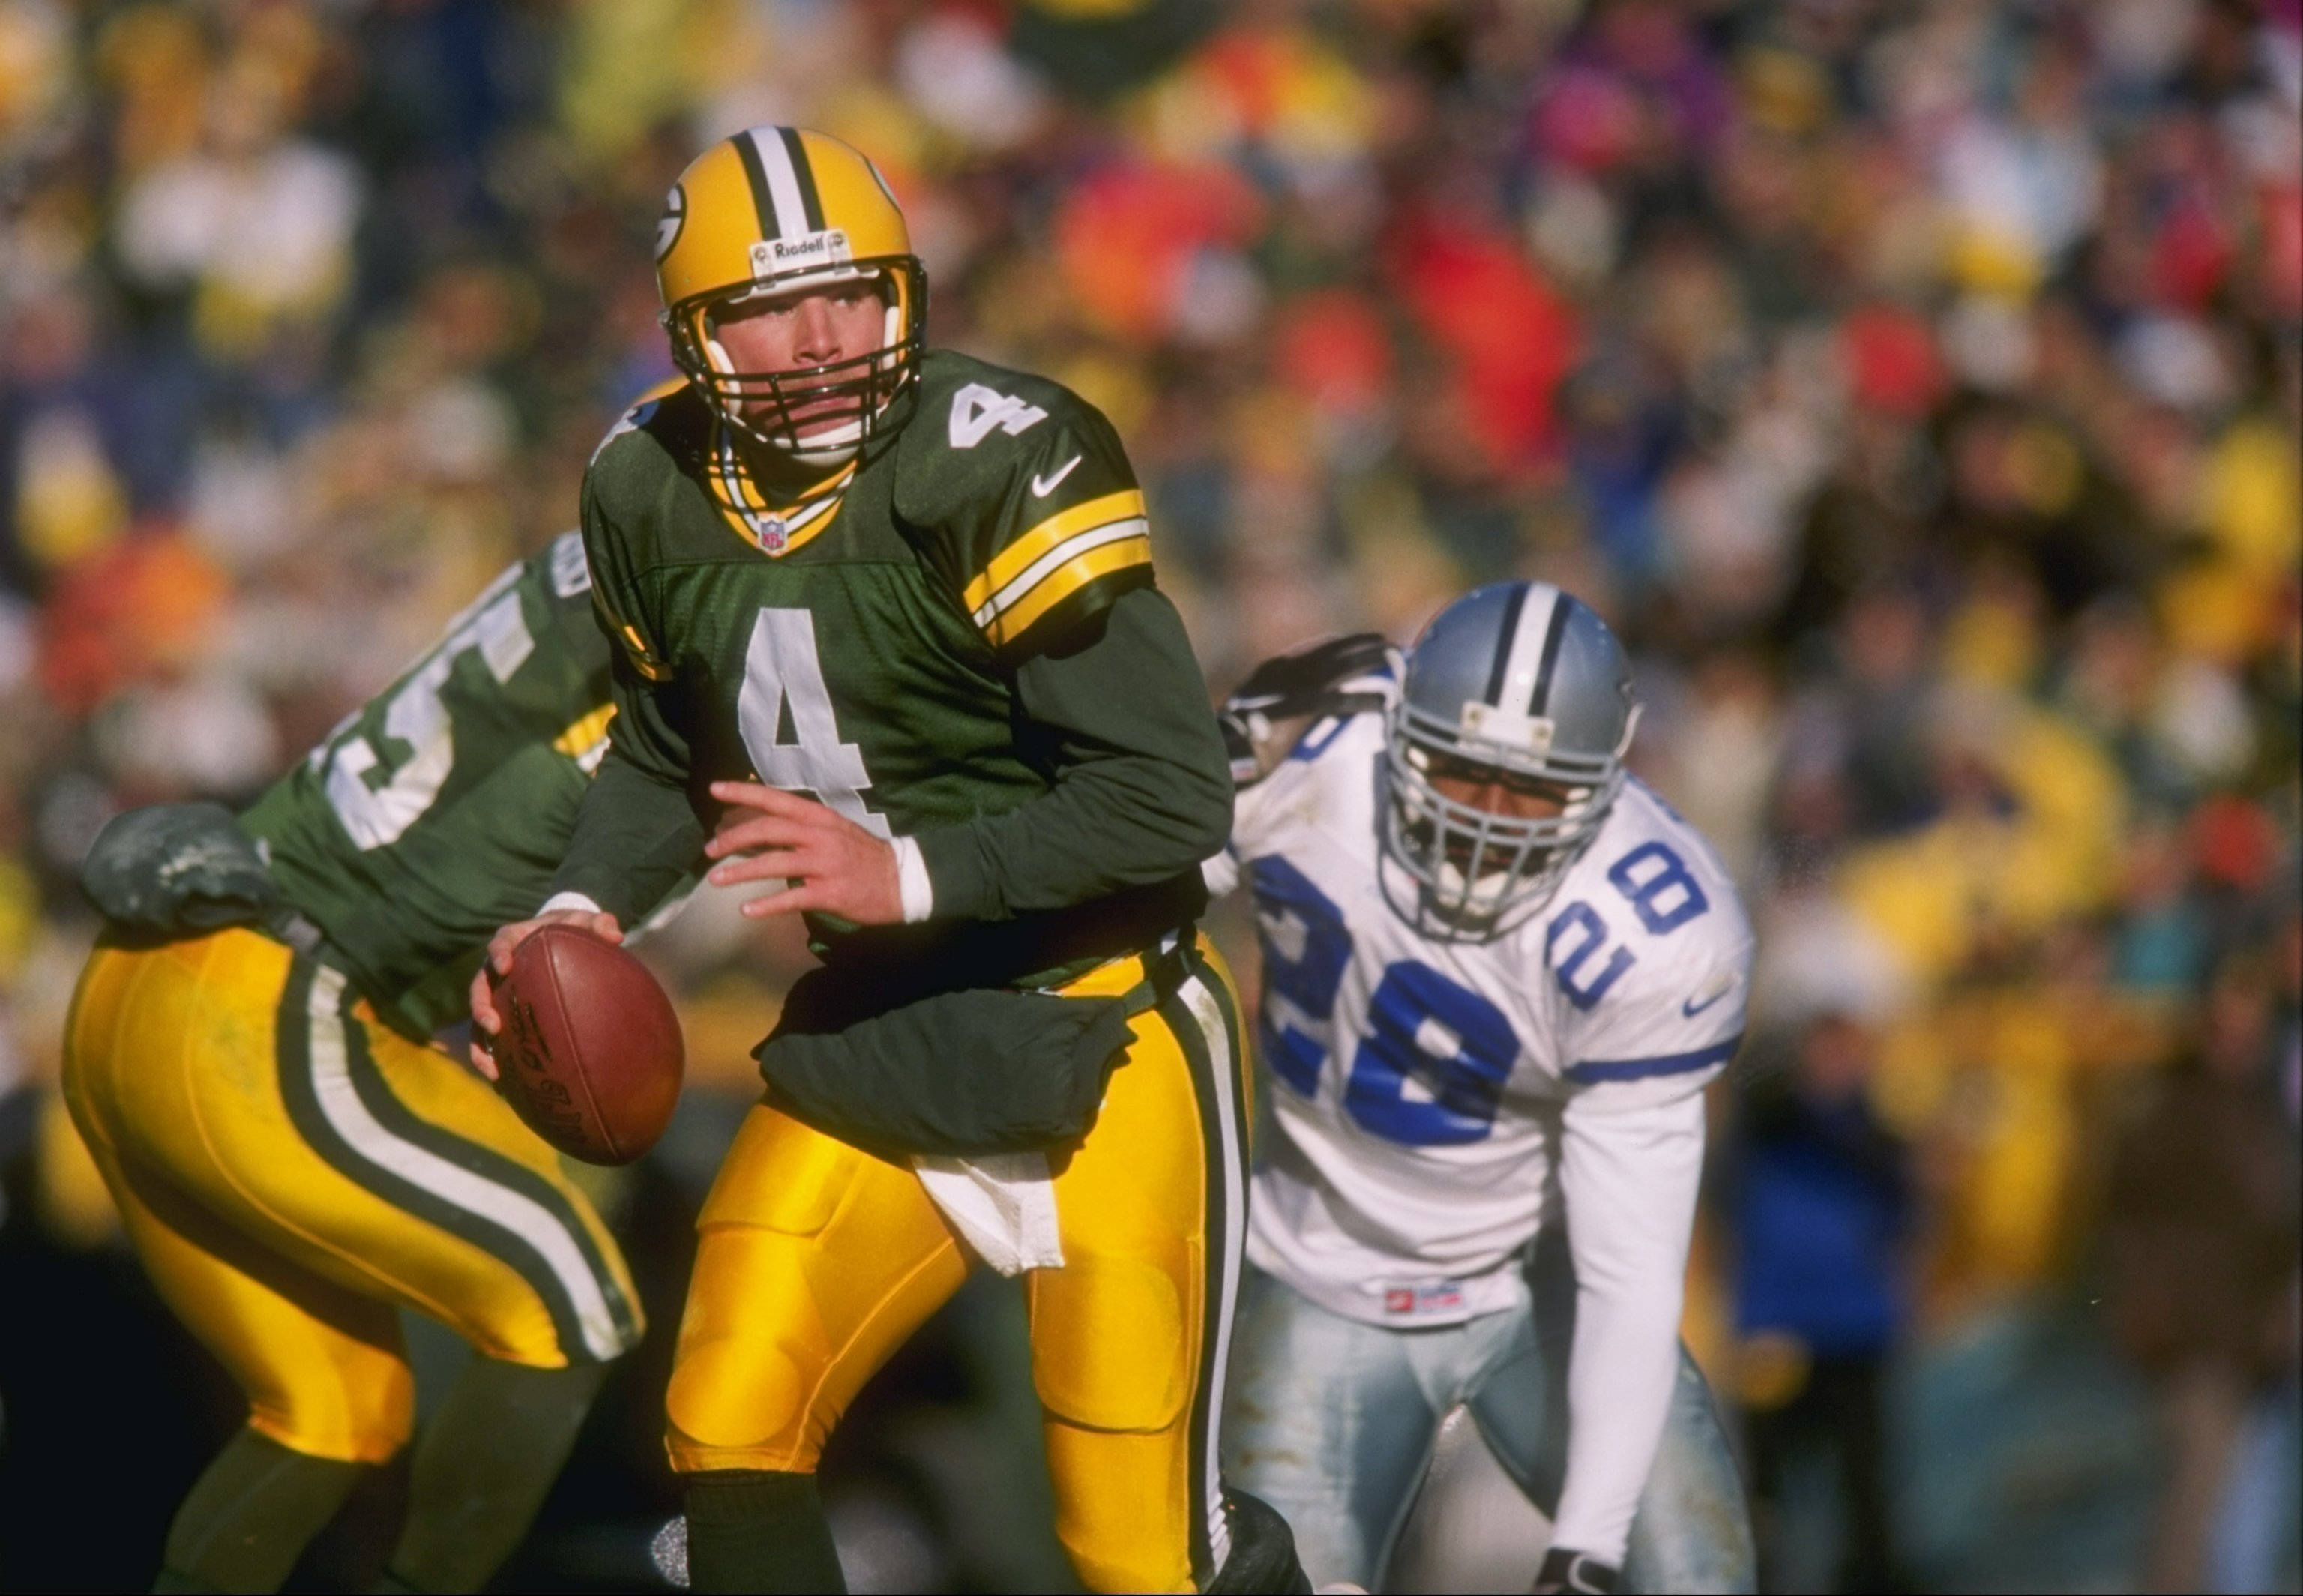 Brett Favre Finds a New Way to Deal With His Aches and Pains